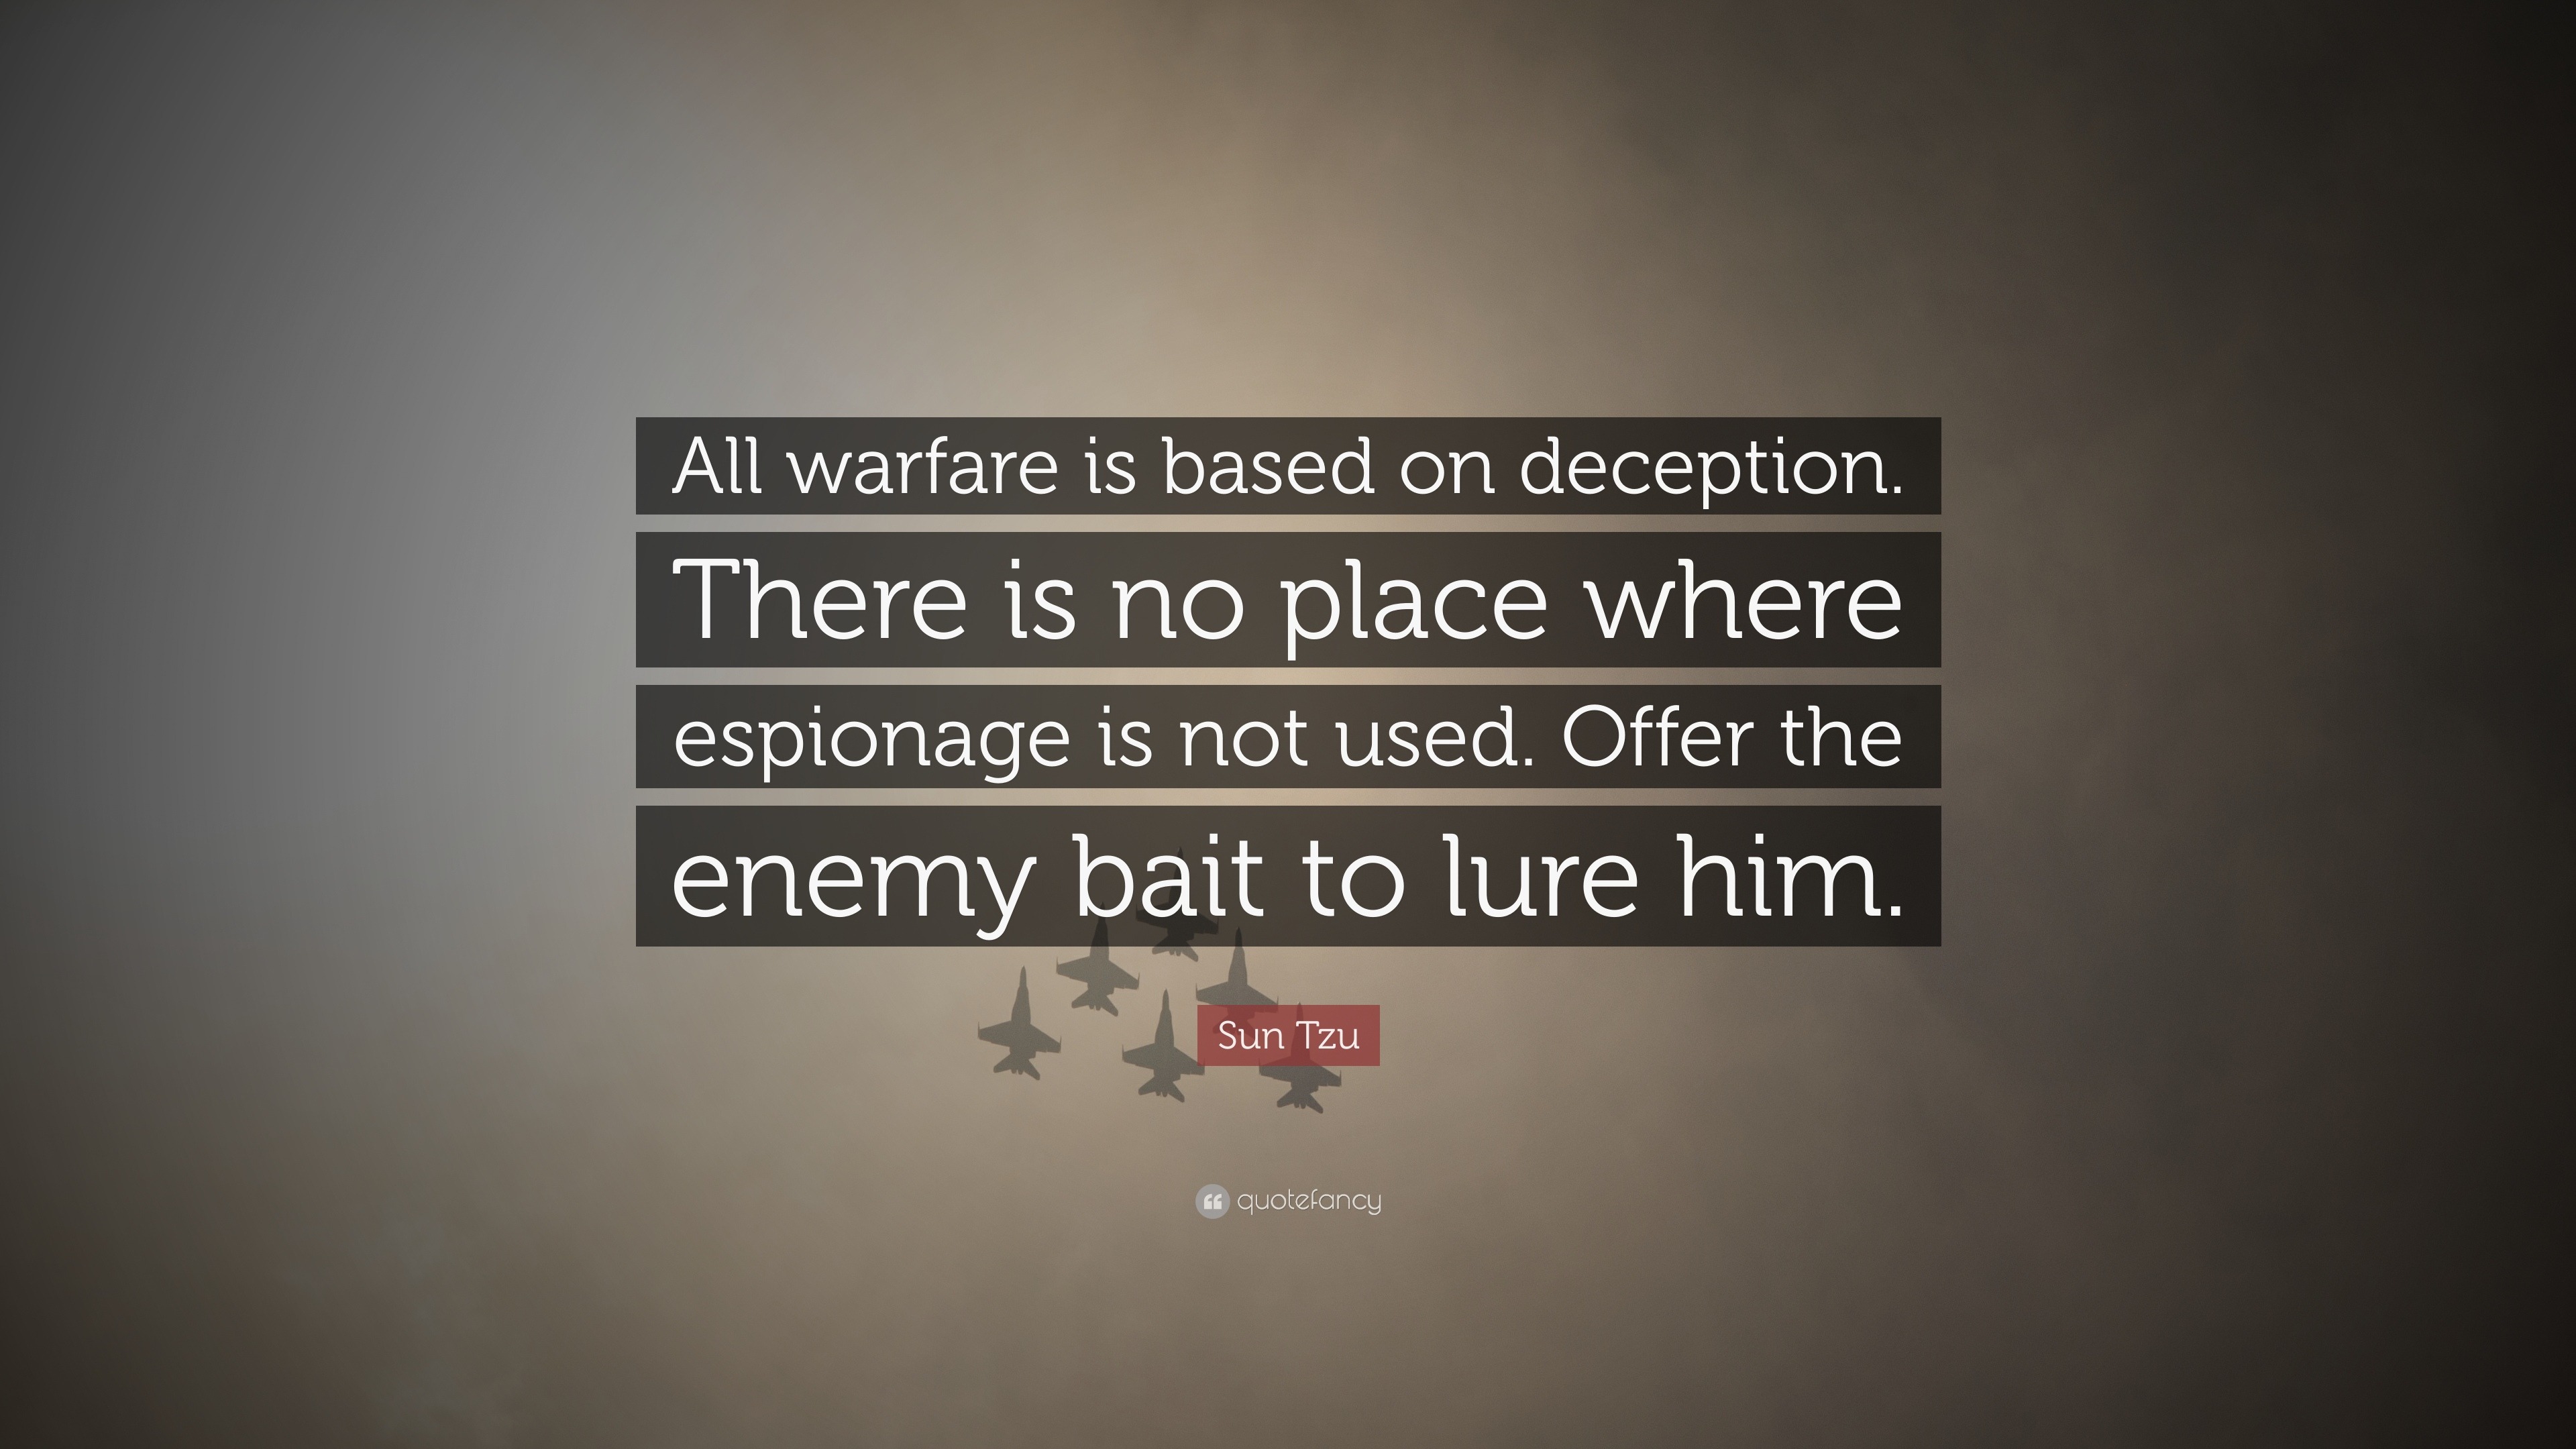 553904-Sun-Tzu-Quote-All-warfare-is-based-on-deception-There-is-no-place.jpg